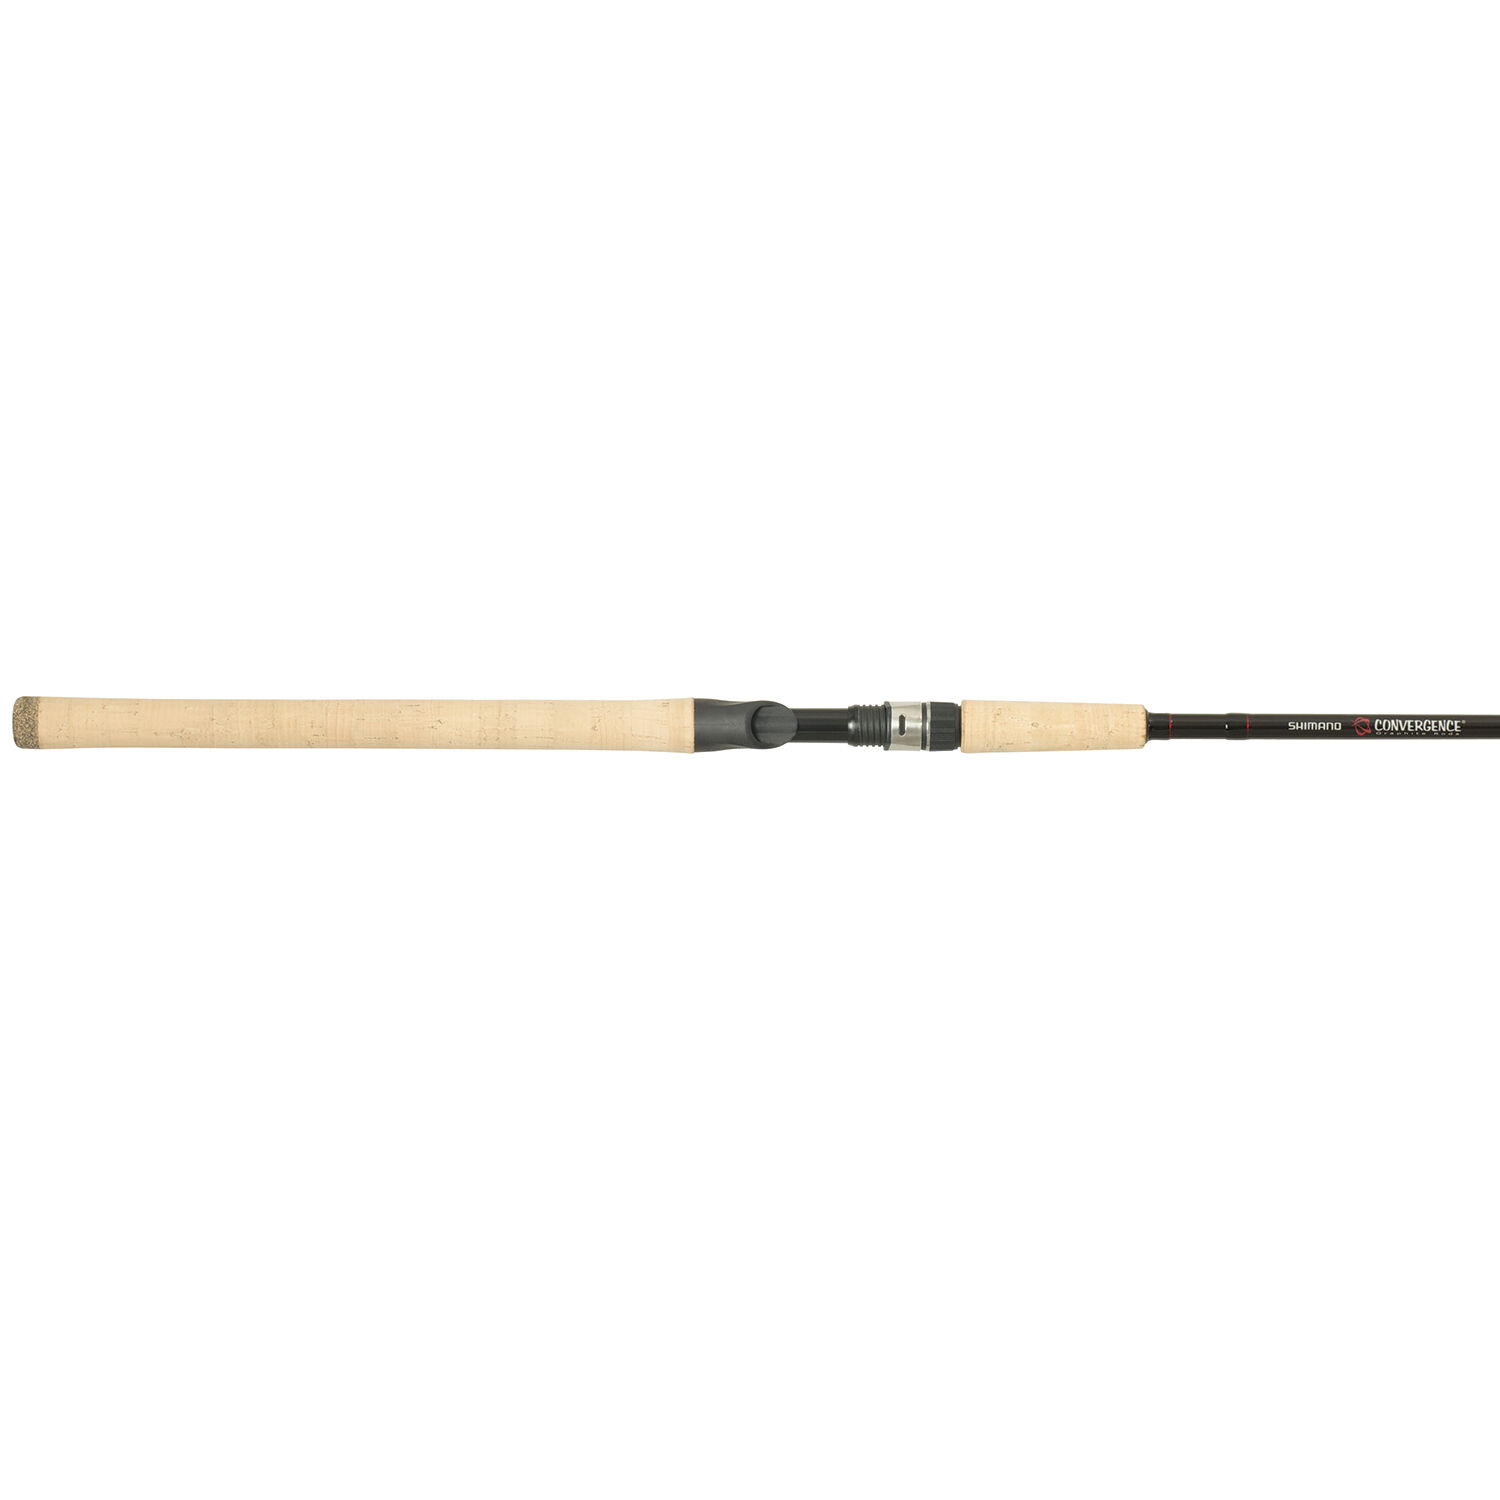 shimano convergence ultralight spinning rod Today's Deals - OFF 61%